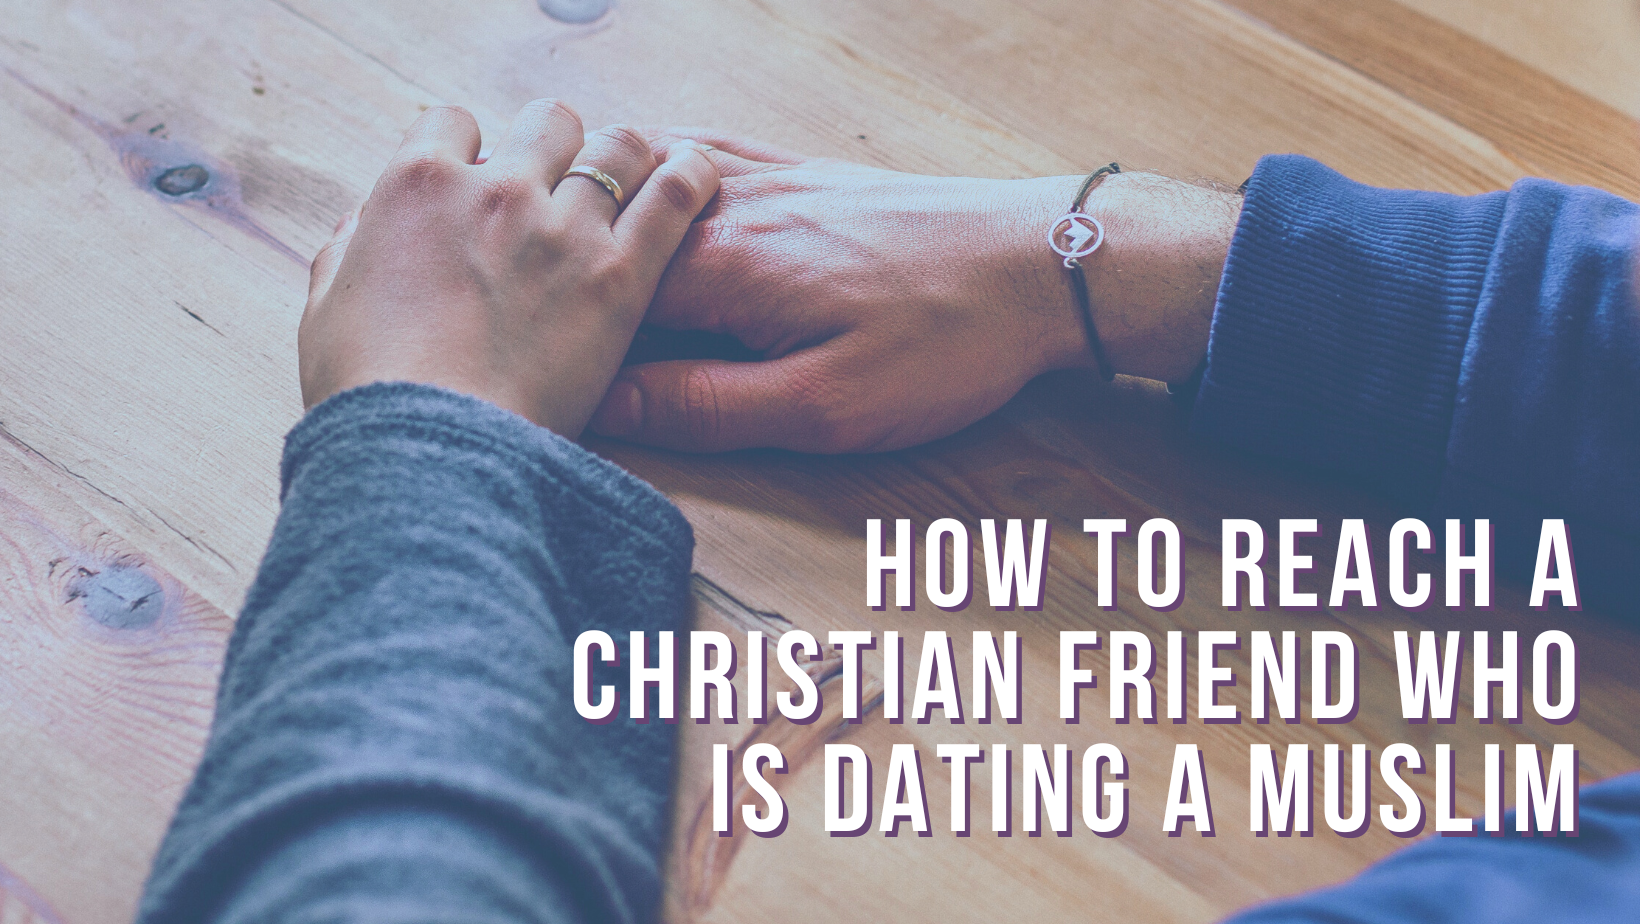 How to reach a Christian friend who is dating a Muslim